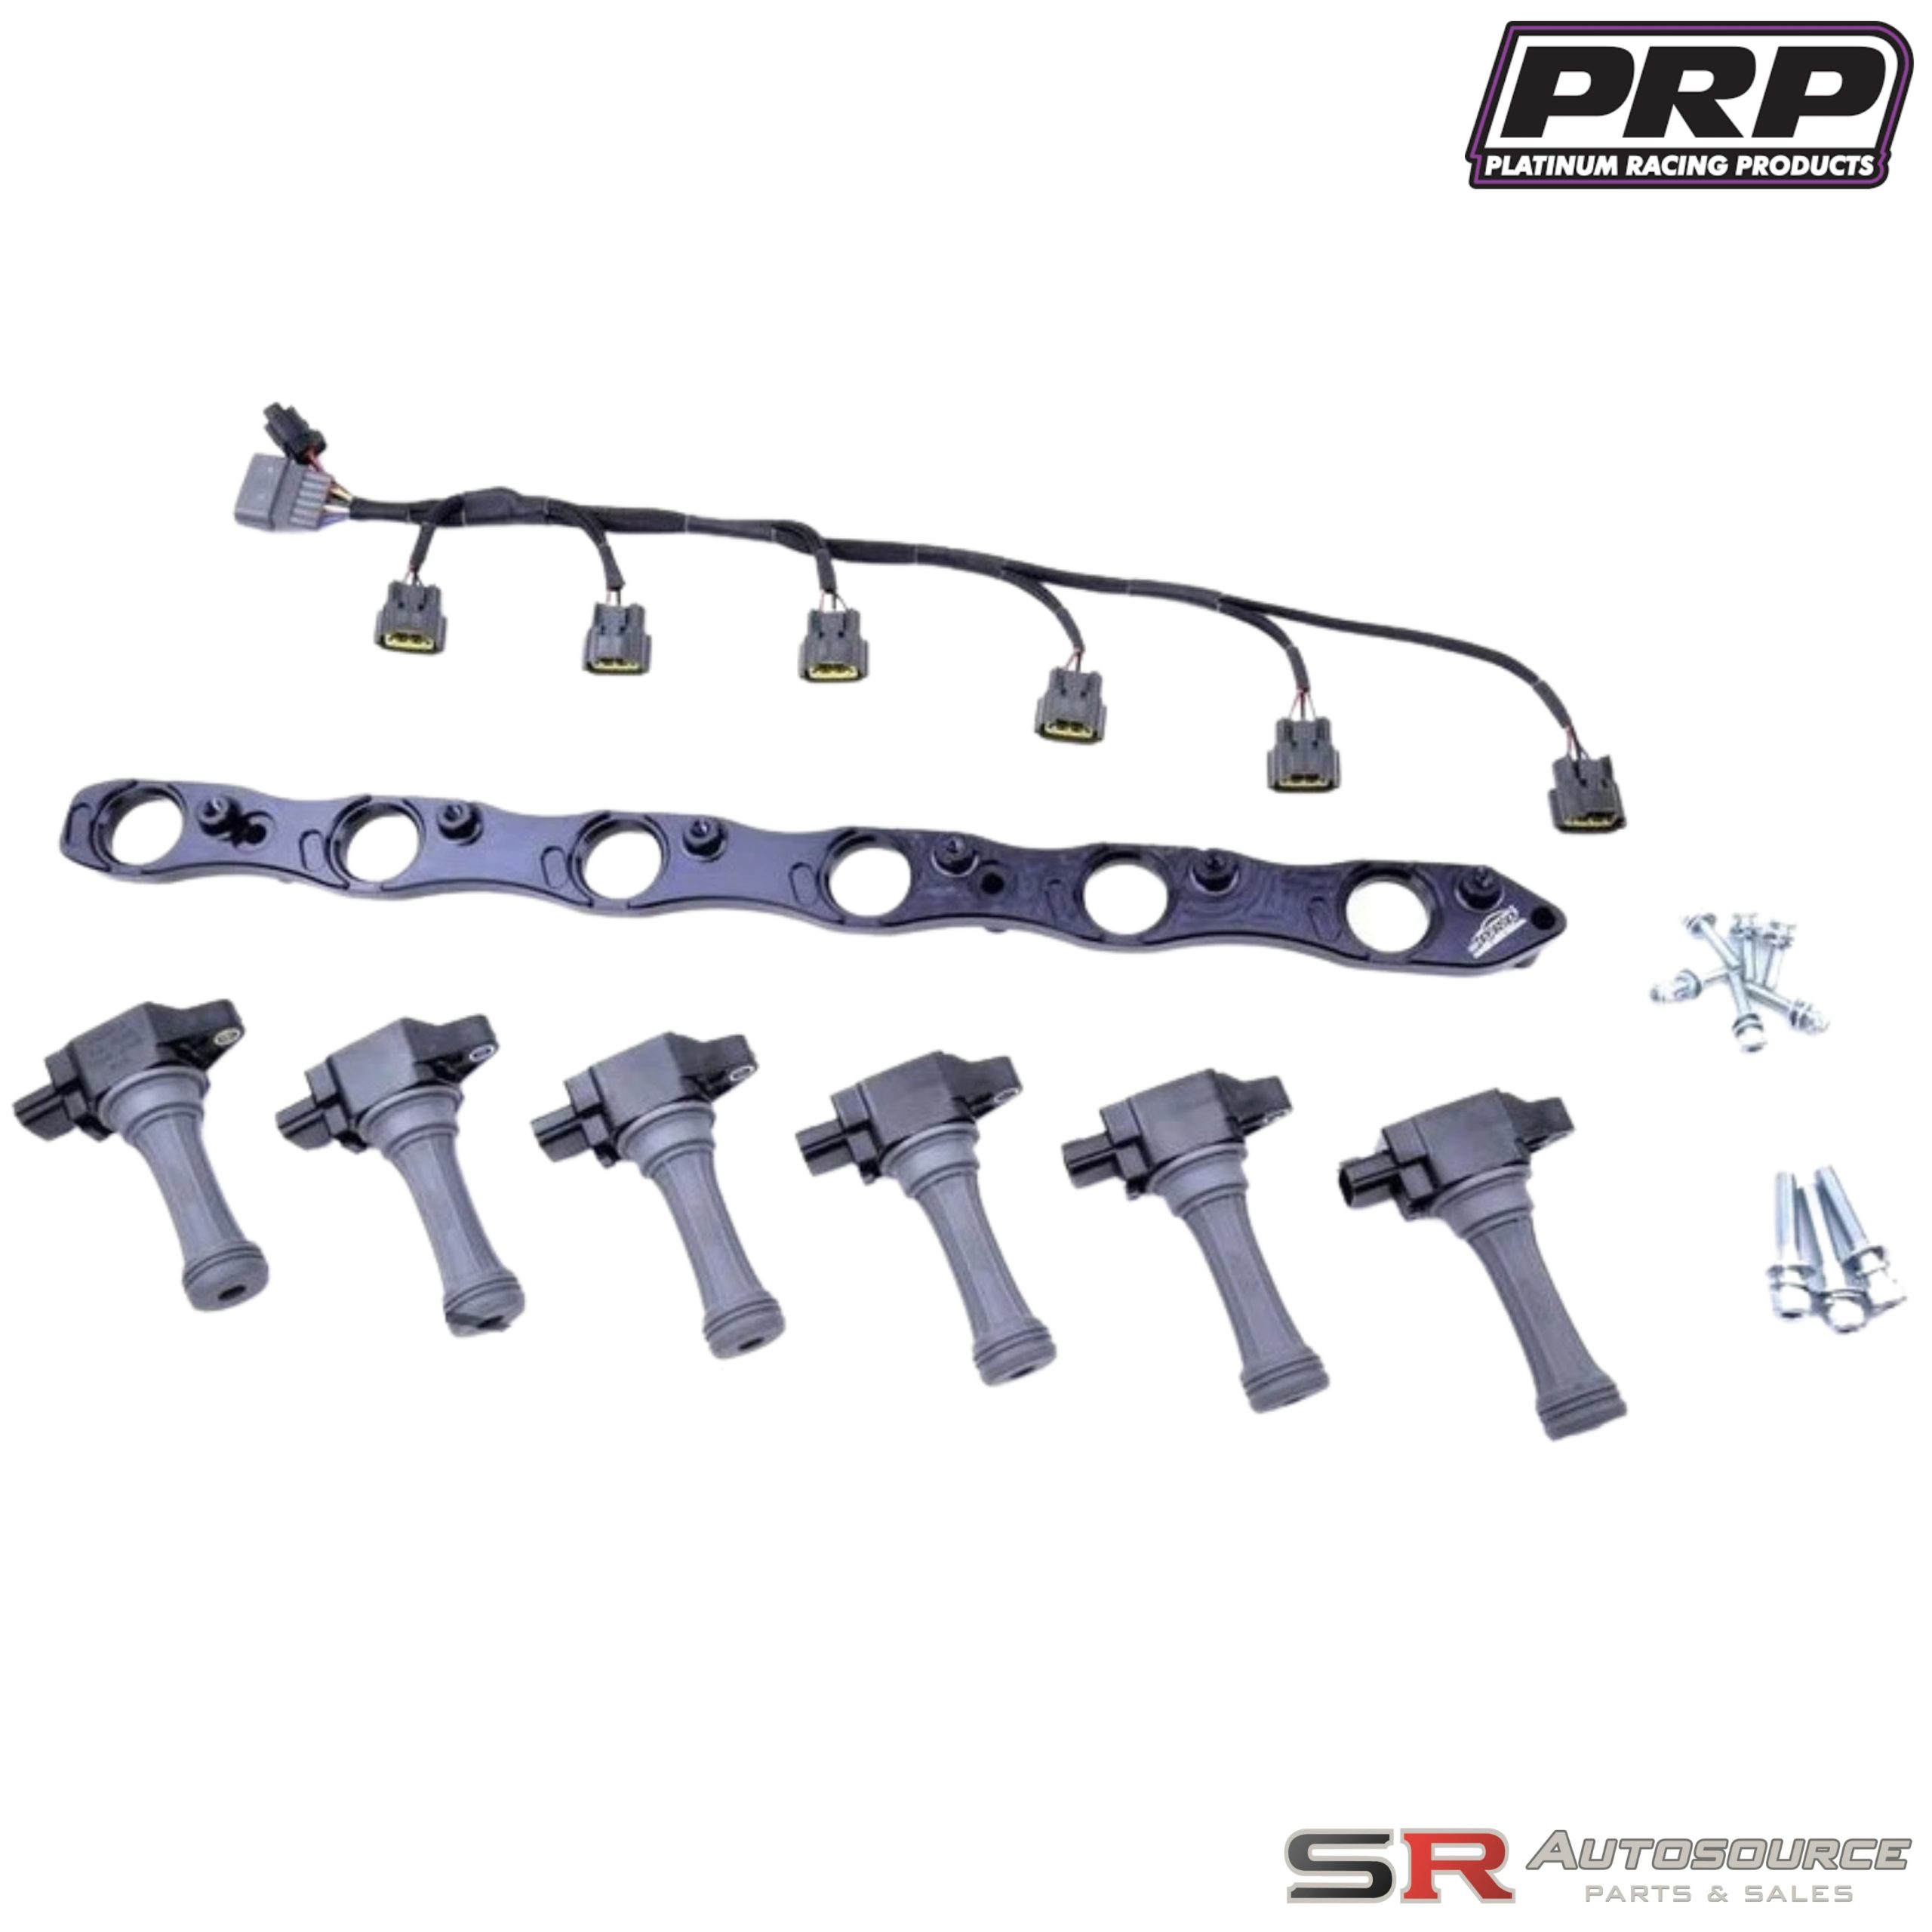 Special Offer – PRP Platinum Racing Products – RB VR38 Complete Coil Kit – R33/R34 GTR